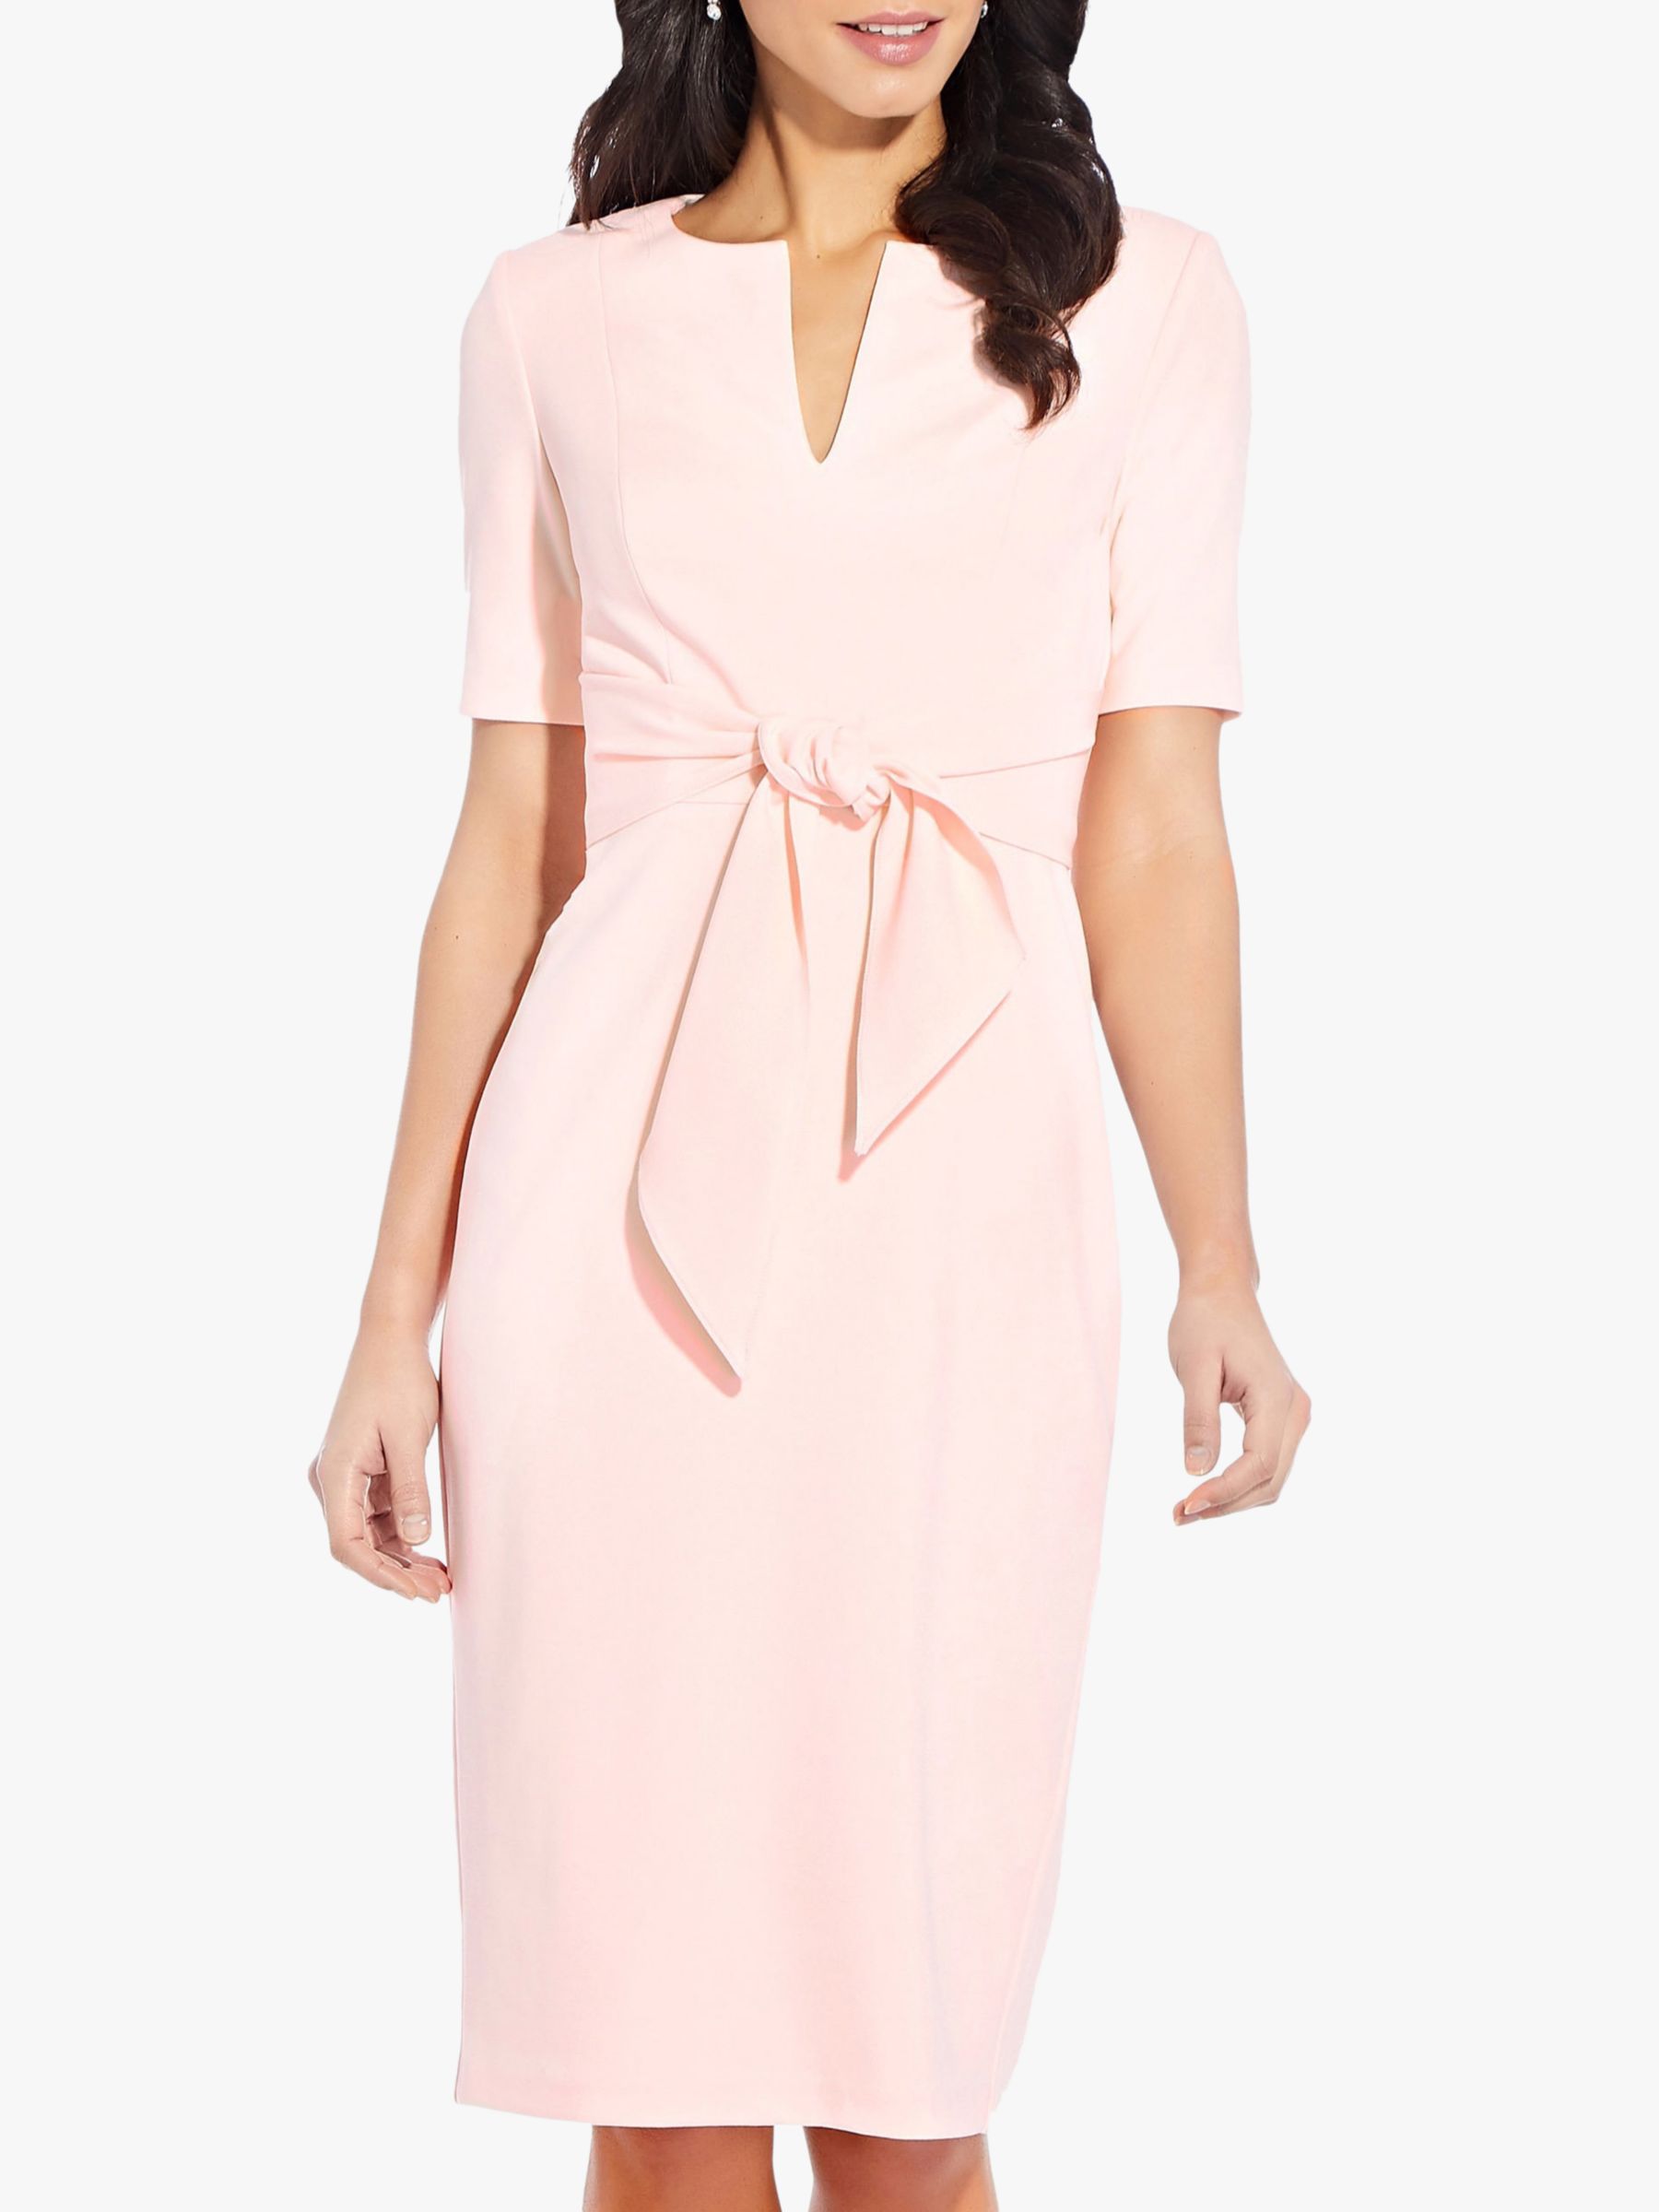 Adrianna Papell Knit Crepe Knee Length Dress